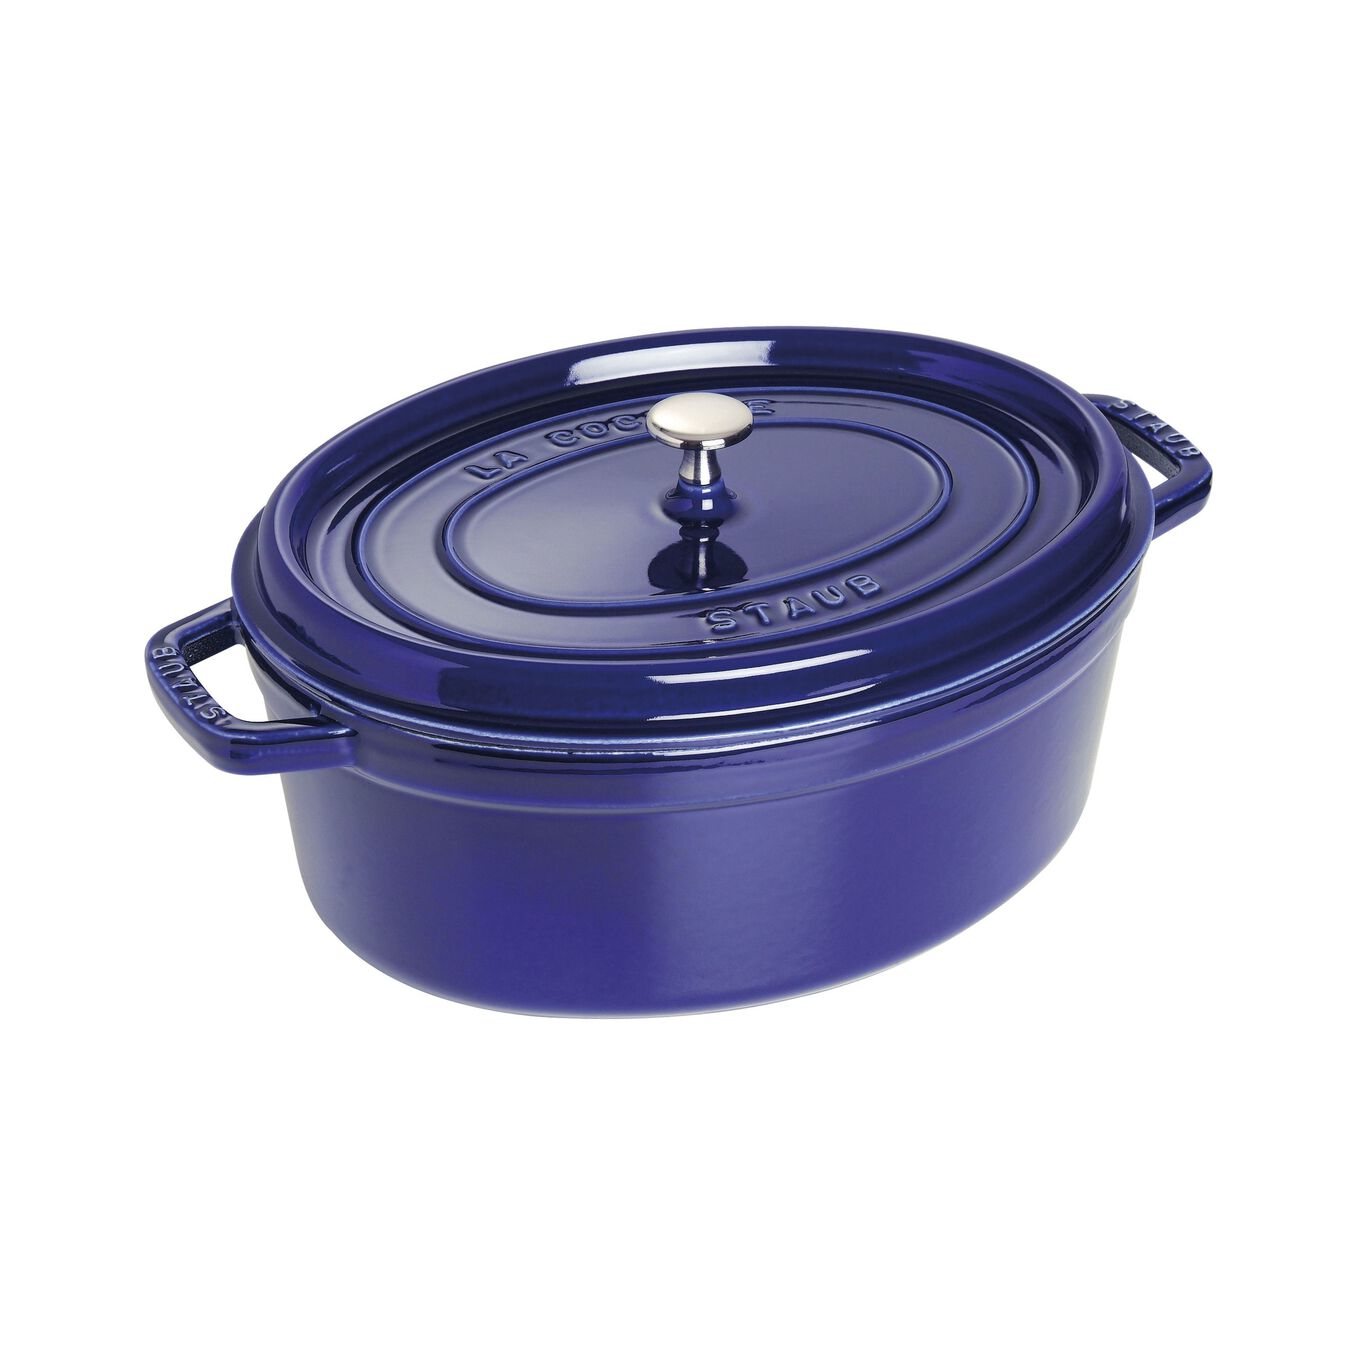 5.5 l cast iron oval Cocotte, dark-blue - Visual Imperfections,,large 1